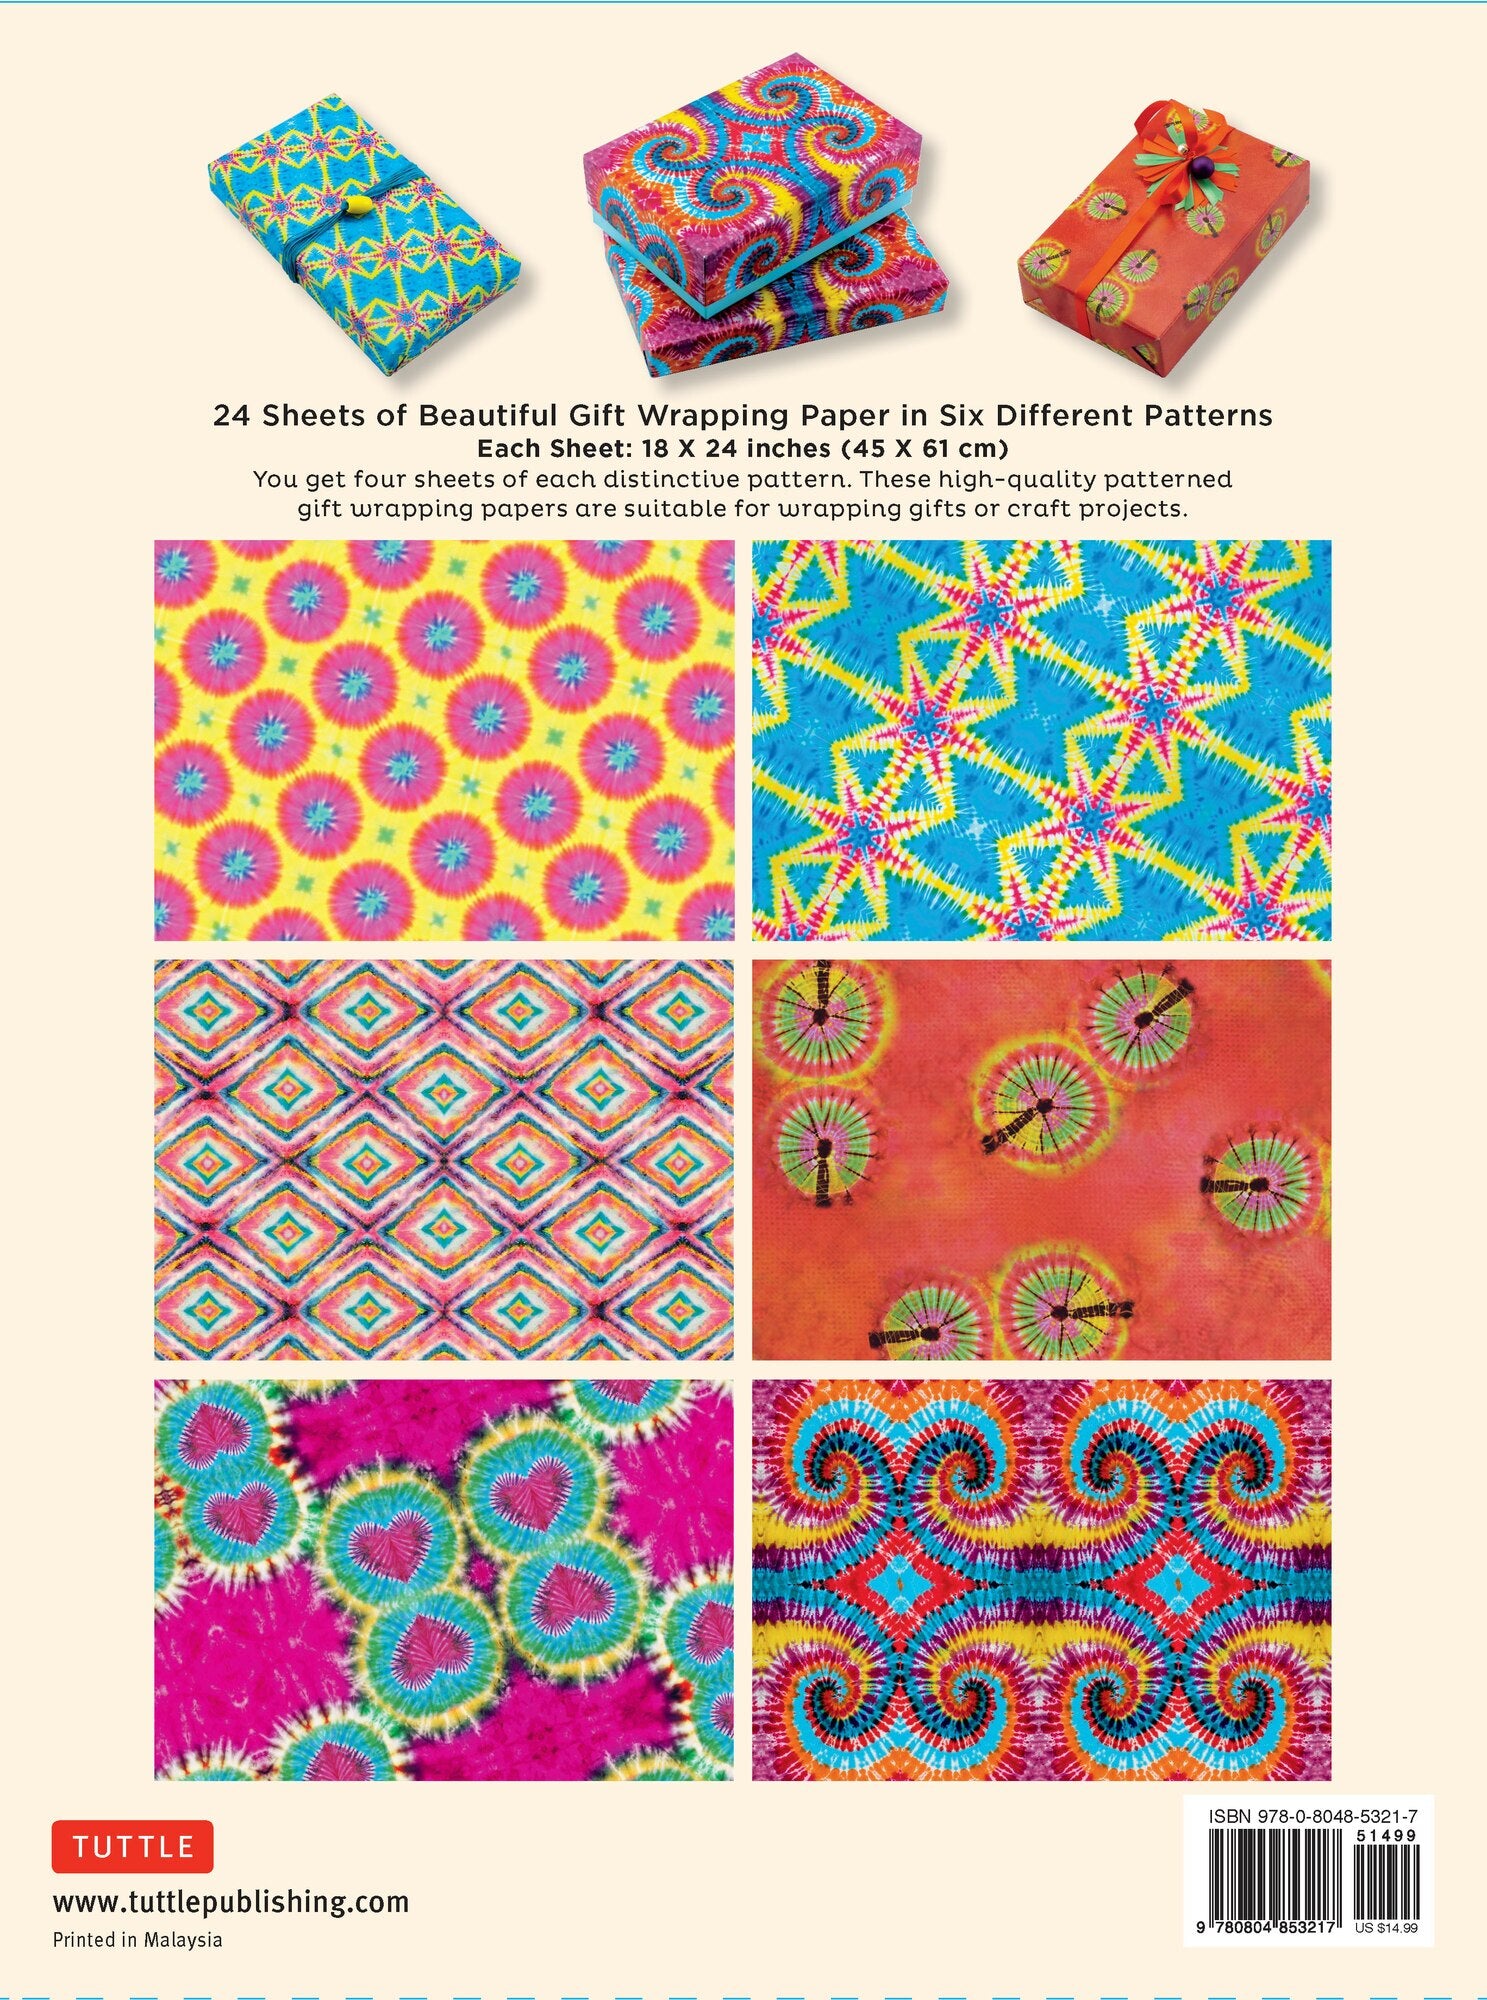 Tie-Dye Gift Wrapping Paper